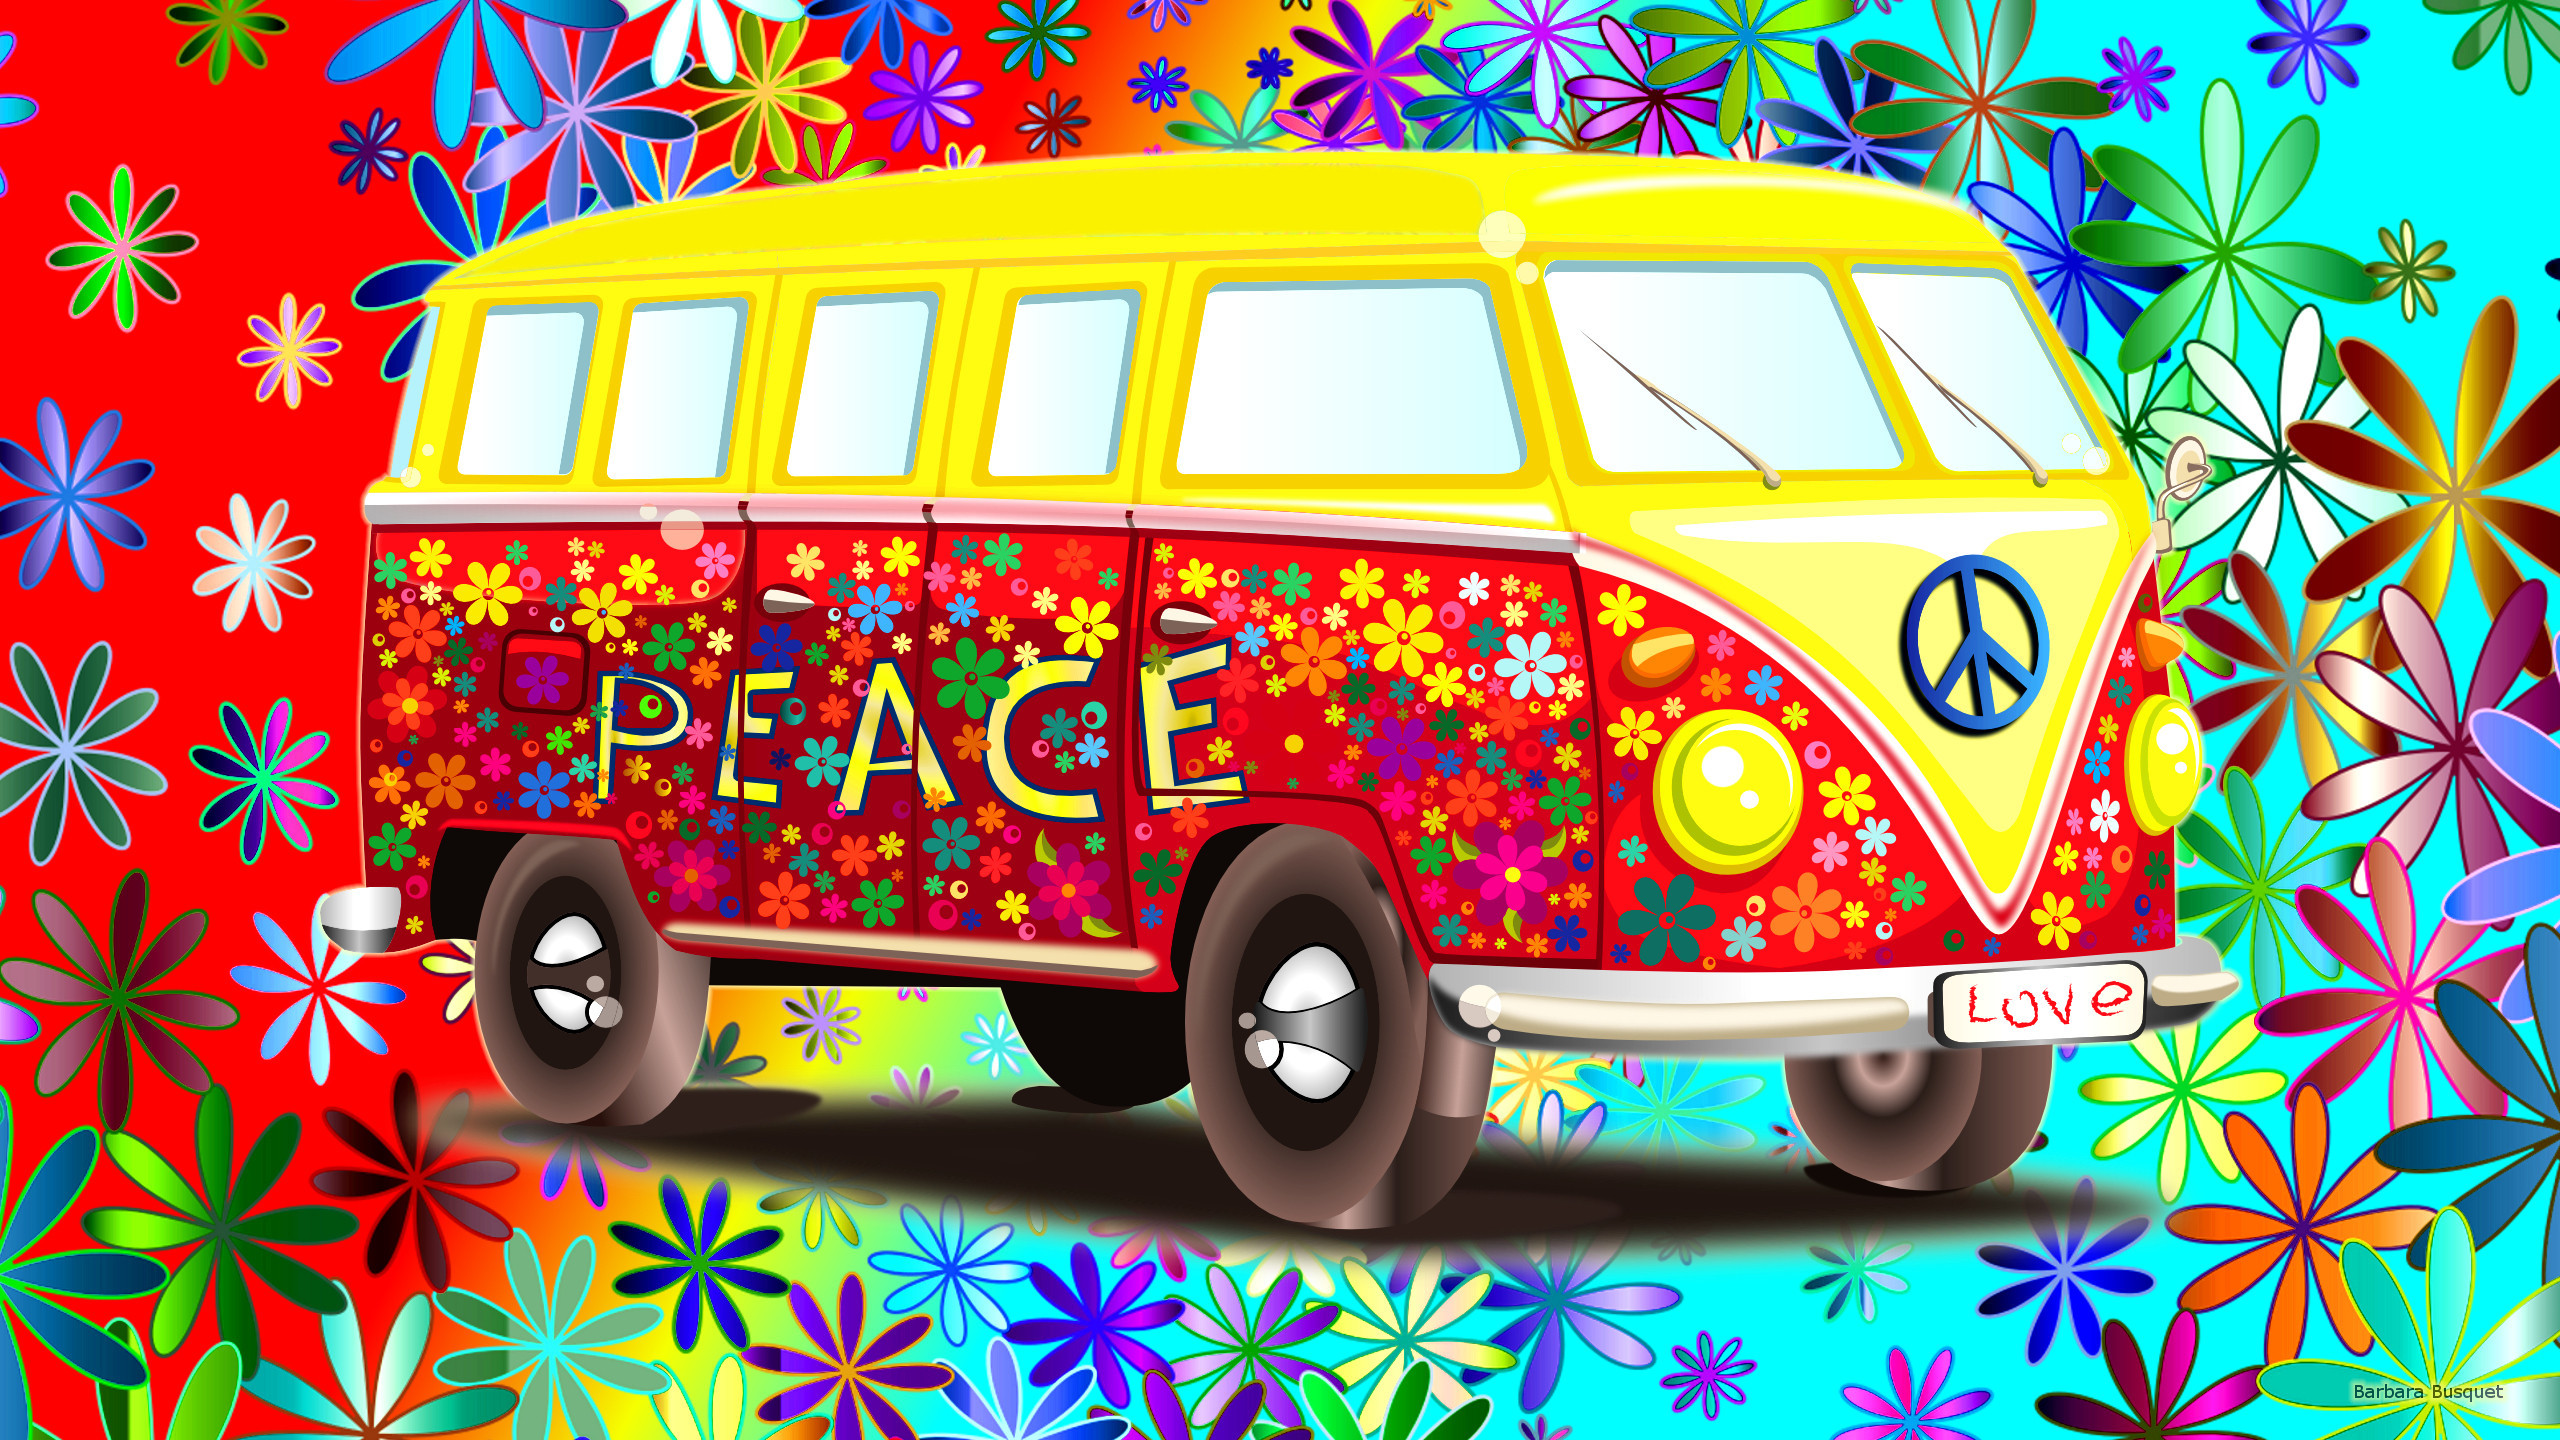 2560x1440 HD wallpaper with a Volkswagen VW bus.